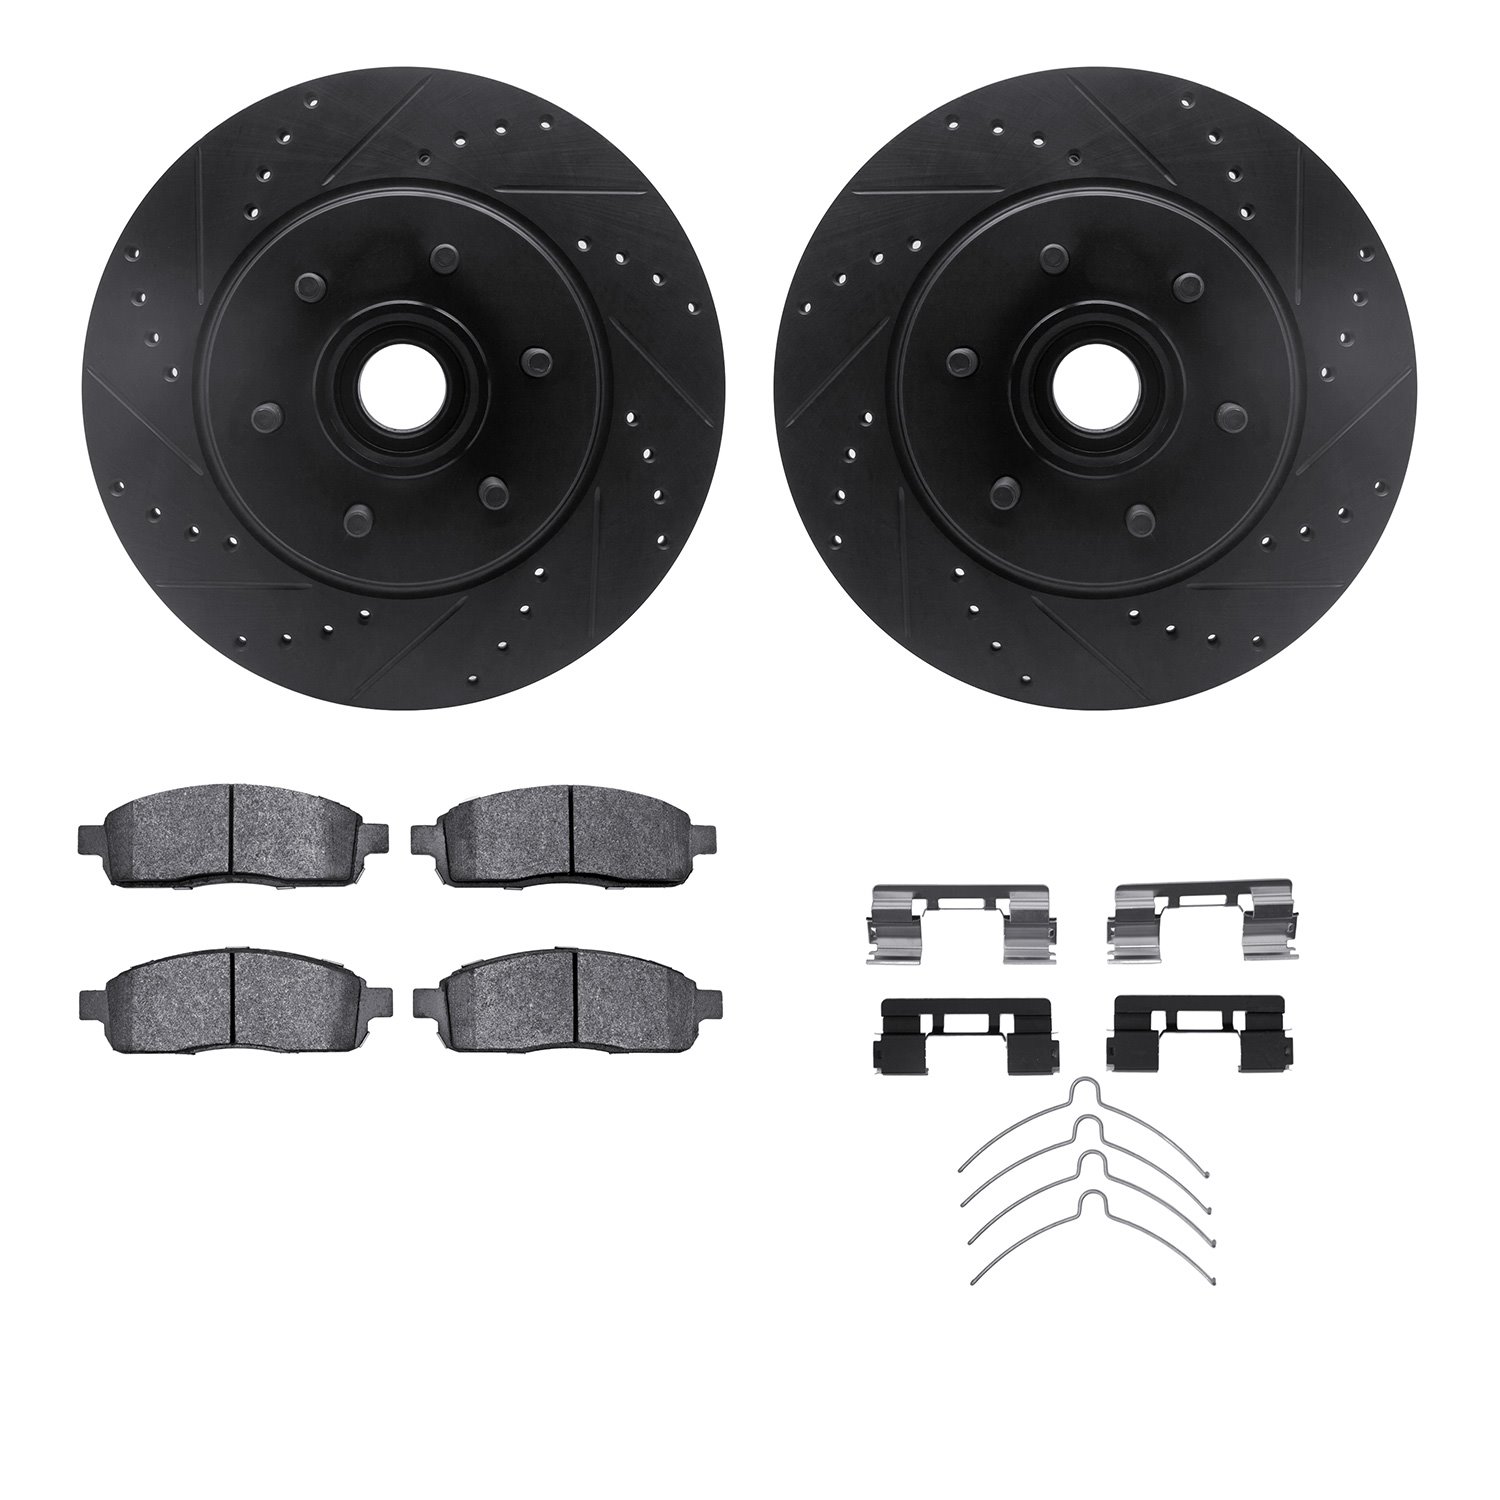 8412-54071 Drilled/Slotted Brake Rotors with Ultimate-Duty Brake Pads Kit & Hardware [Black], 2004-2008 Ford/Lincoln/Mercury/Maz